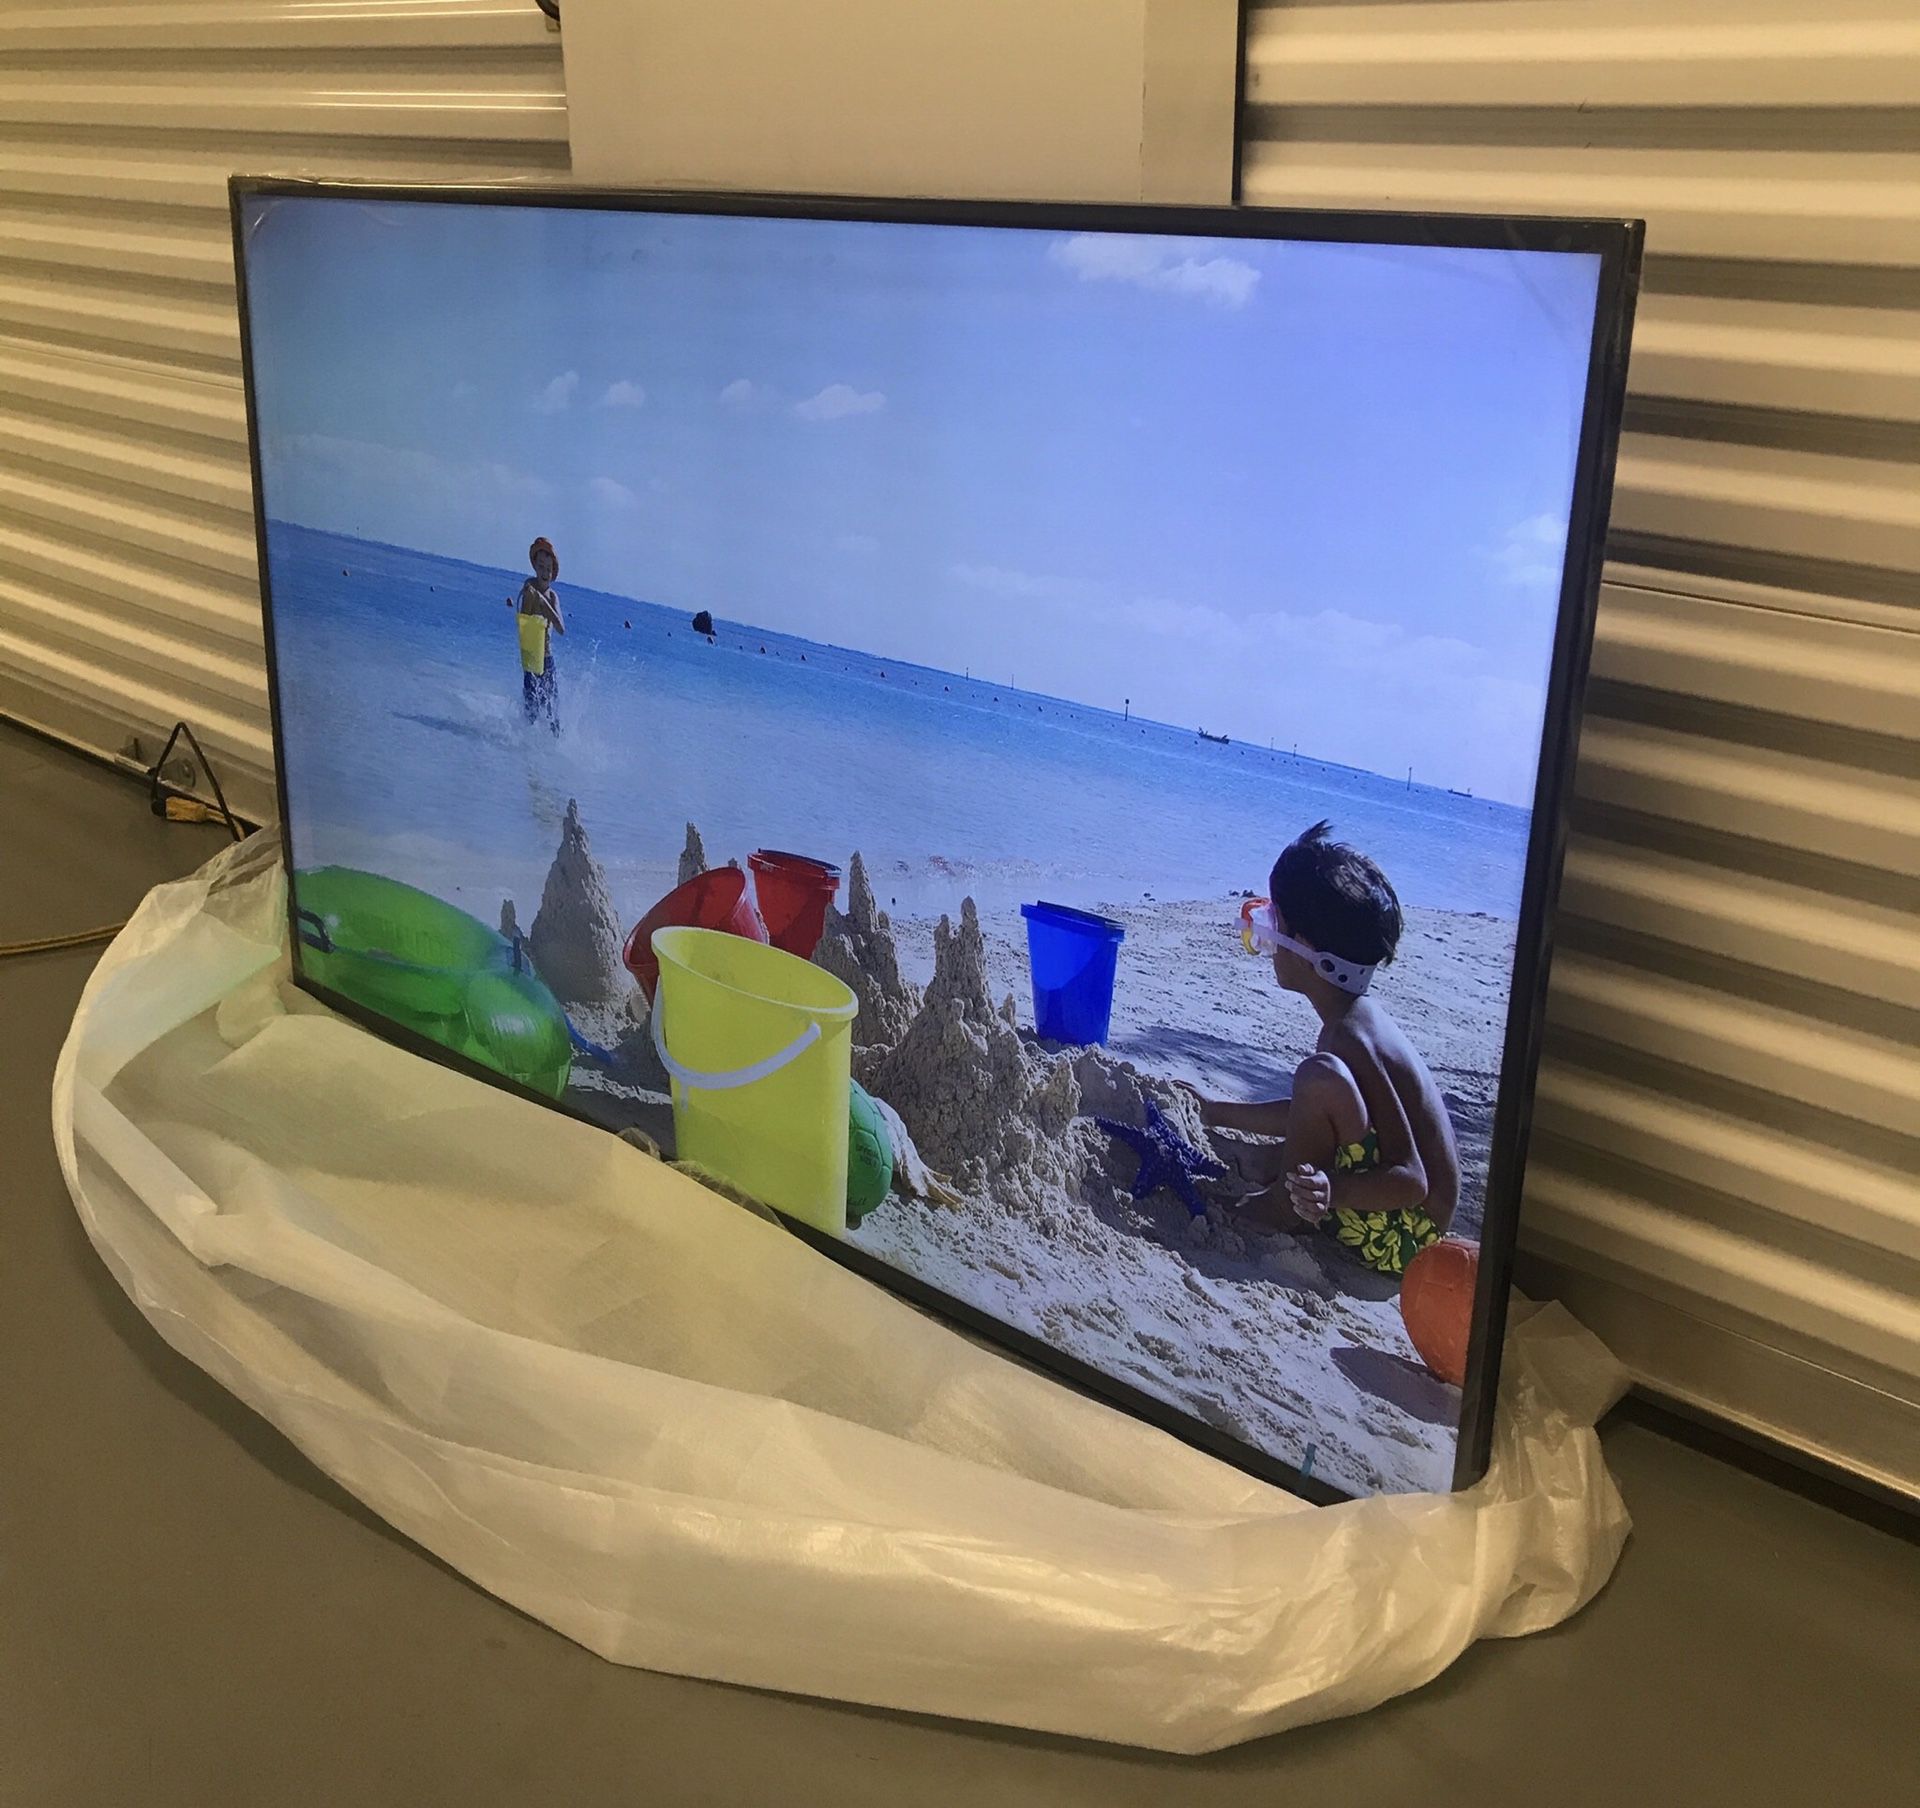 SAMSUNG 58 INCH 4K SMART TV! 3 month guarantee. Comes with legs and remote. PICKUP SPECIAL!